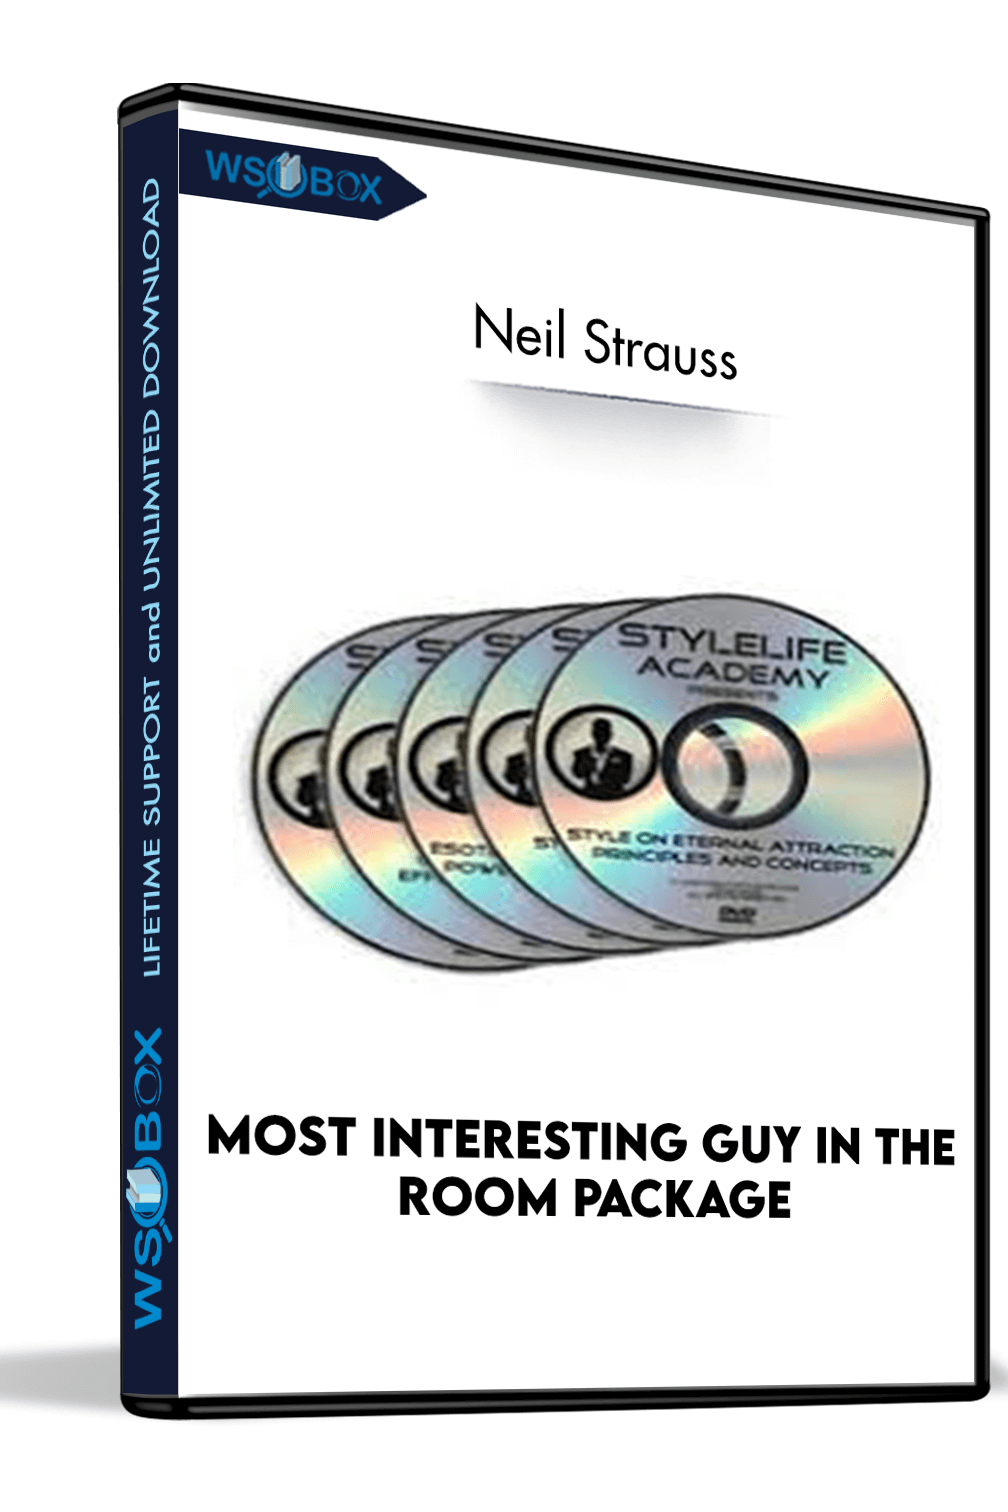 most-interesting-guy-in-the-room-package-neil-strauss